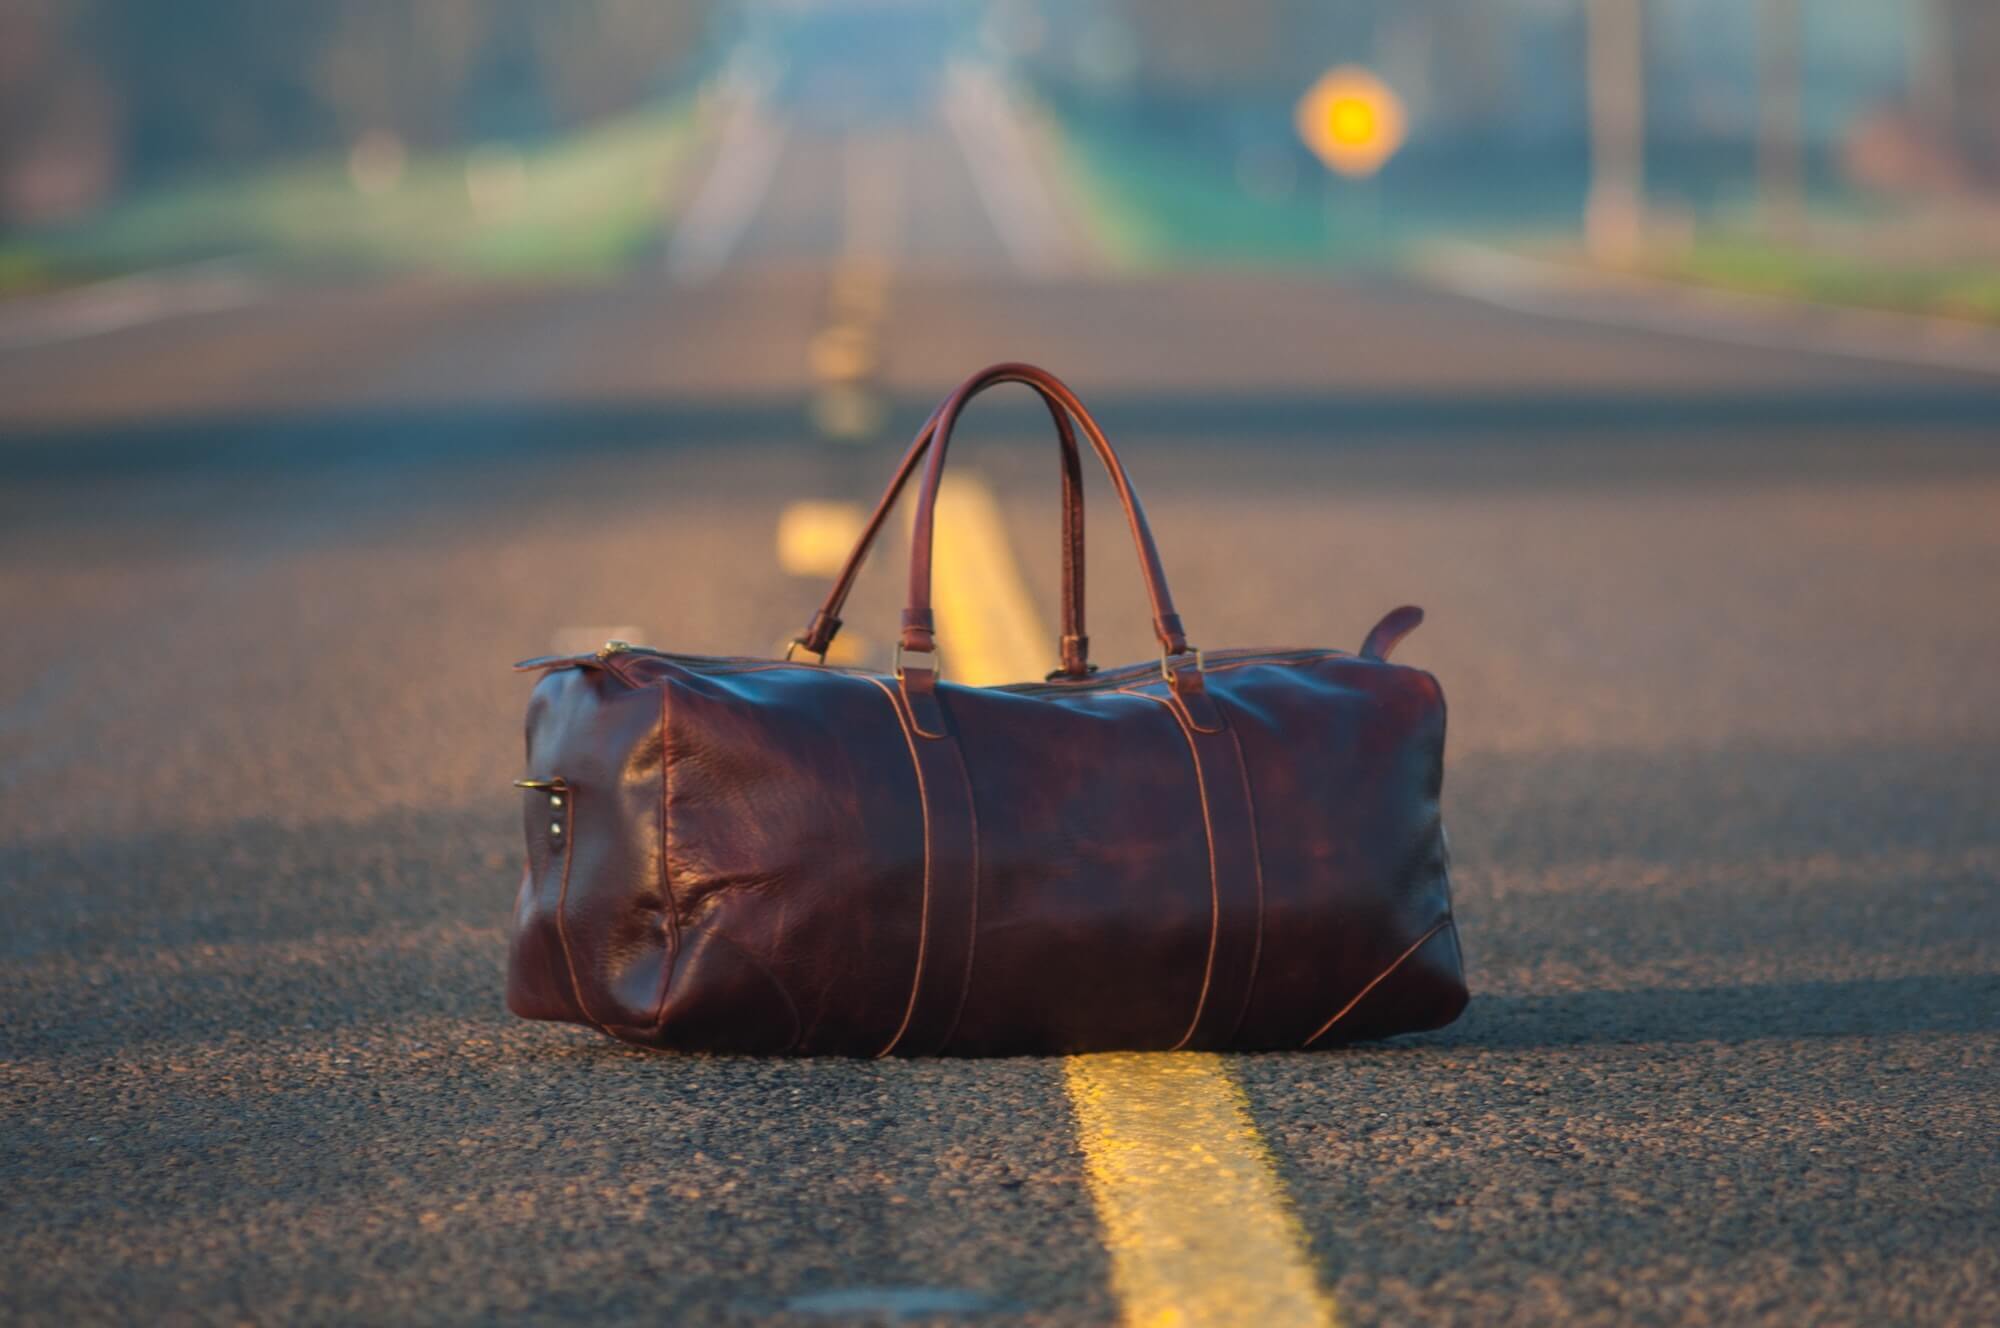 Brown leather duffle bag sits on the yellow line in the middle of an empty road